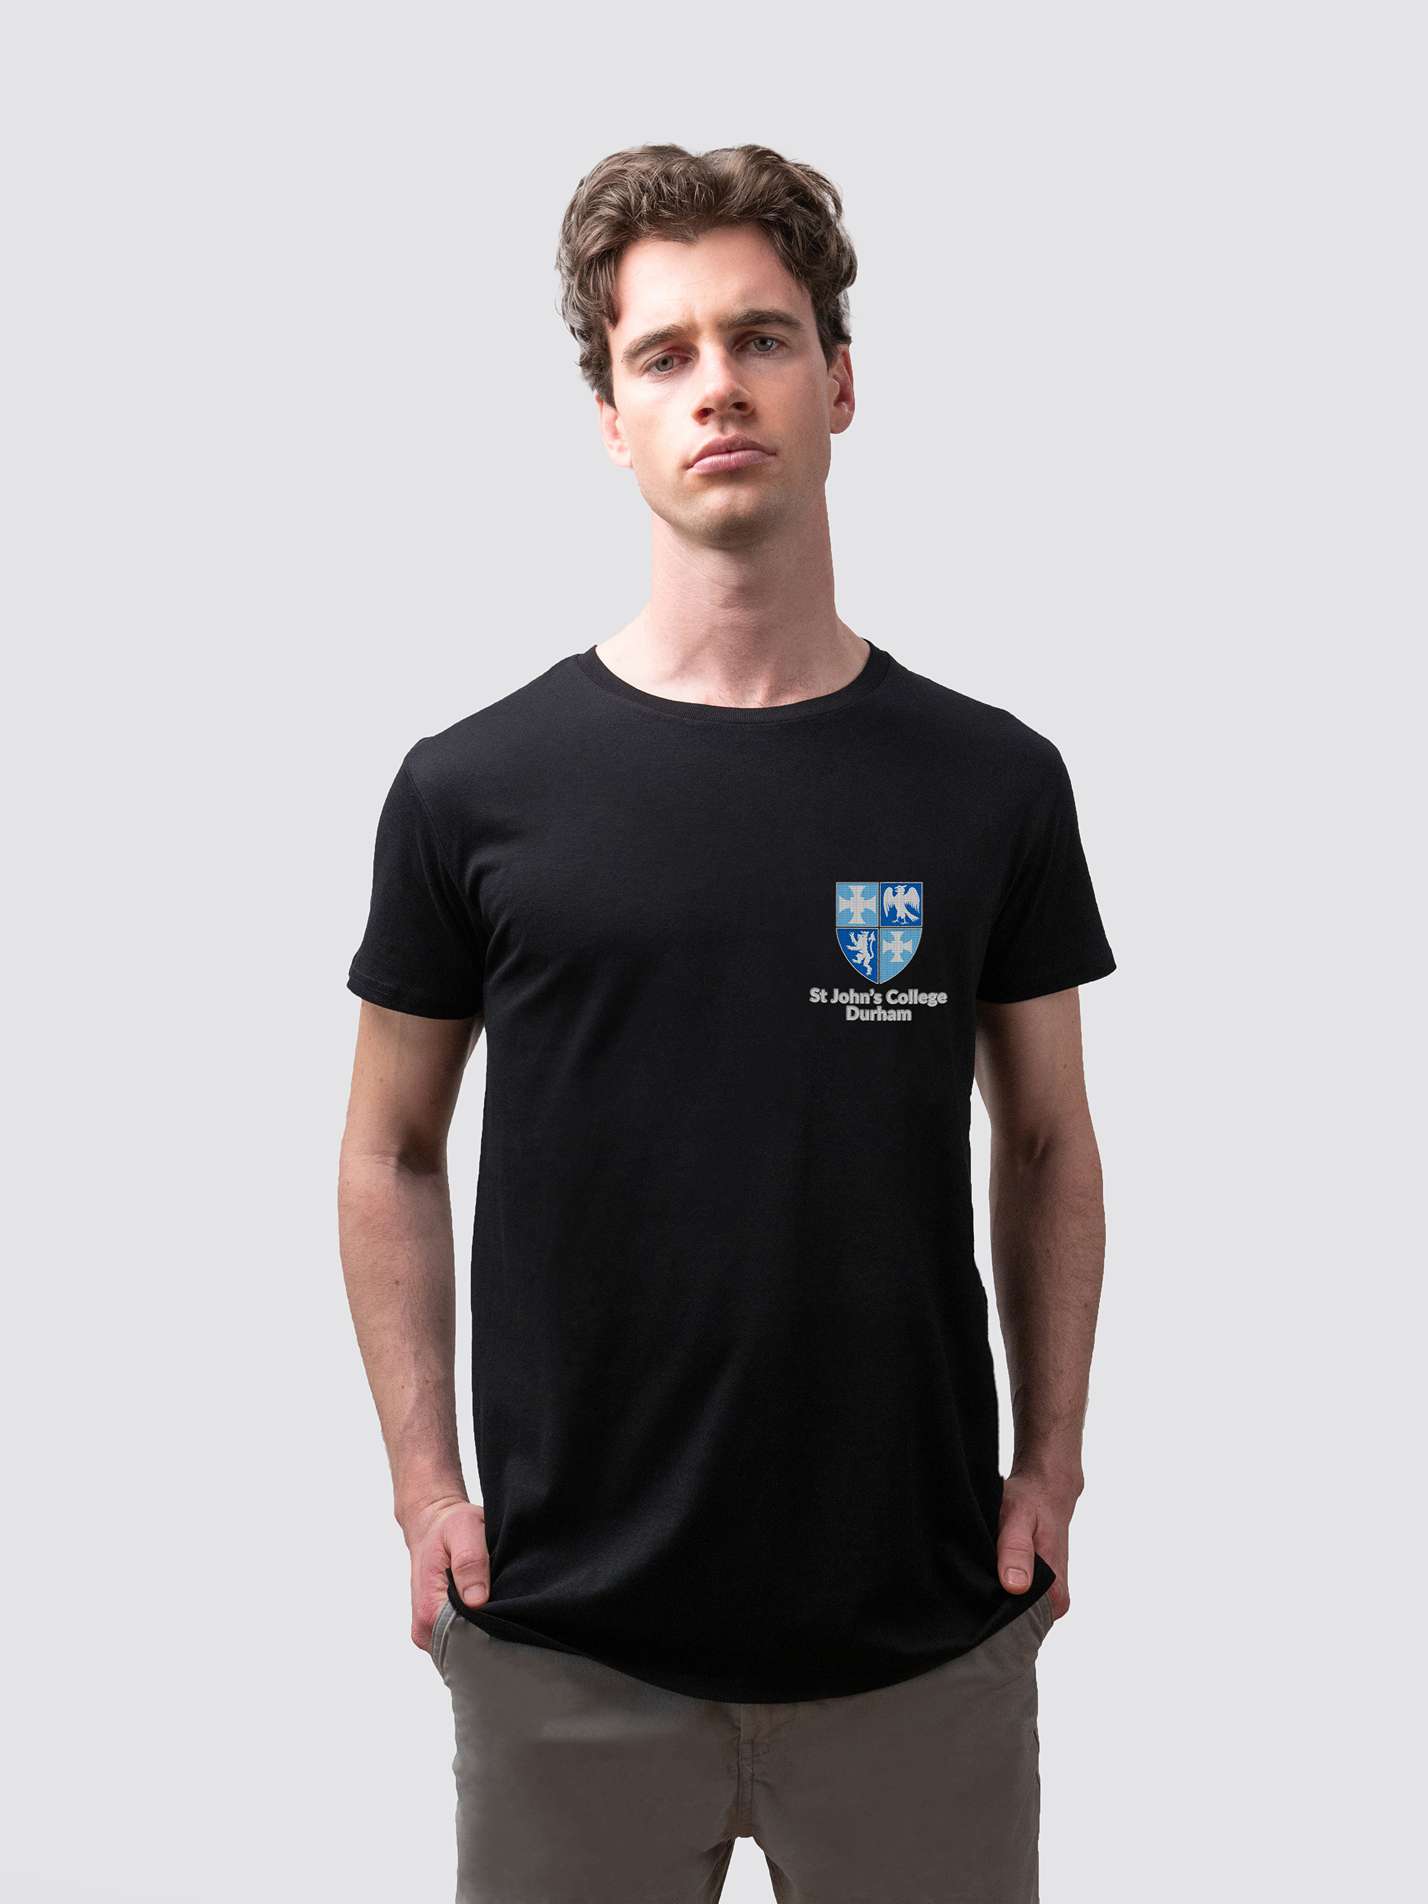 Sustainable St John's t-shirt, made from organic cotton